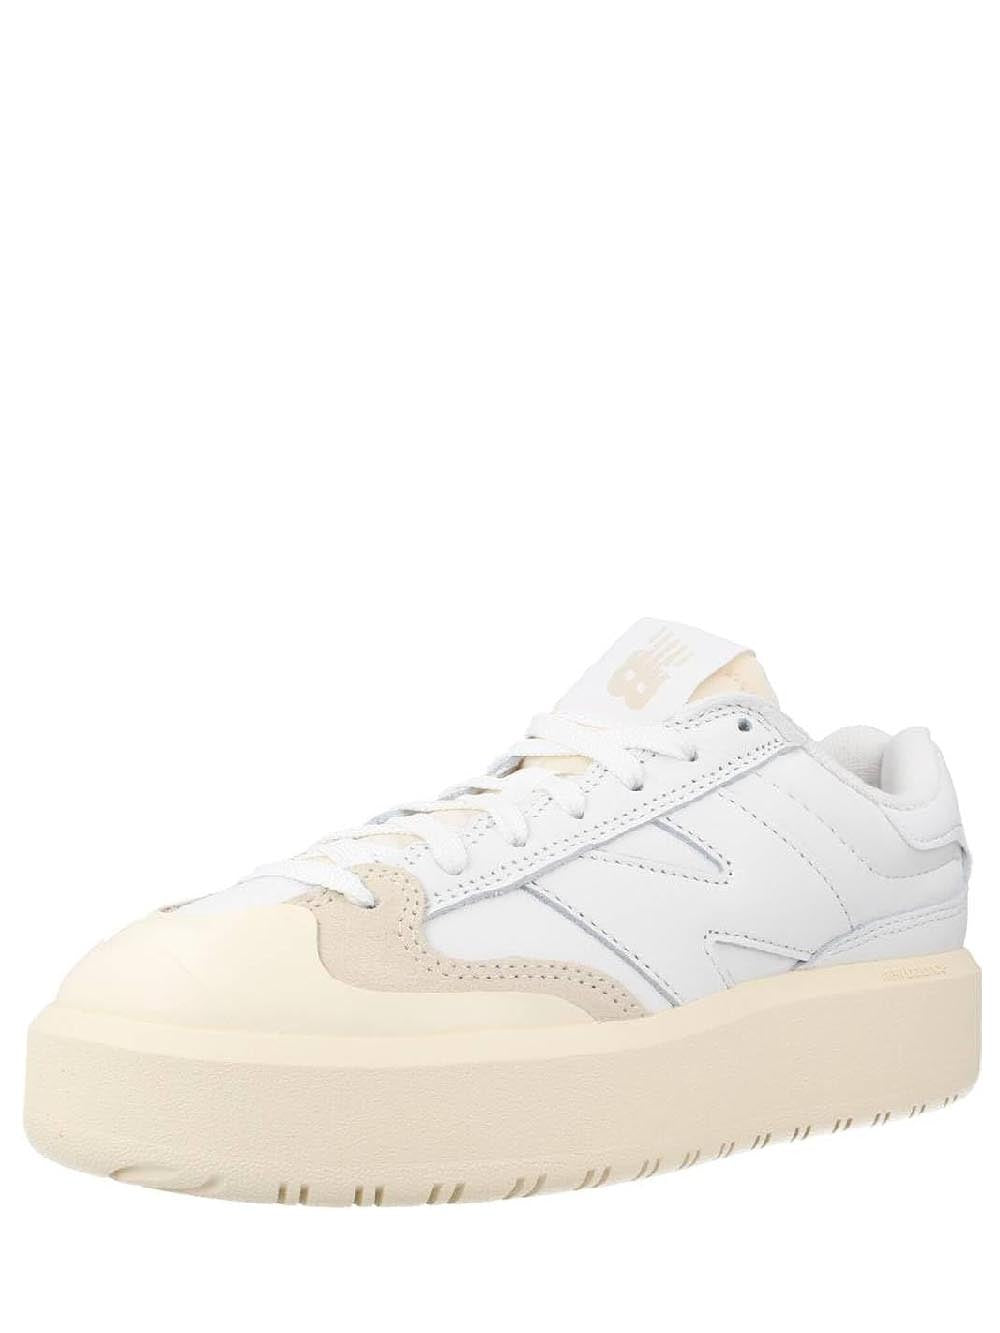 New Balance Sneakers Donna Bianco